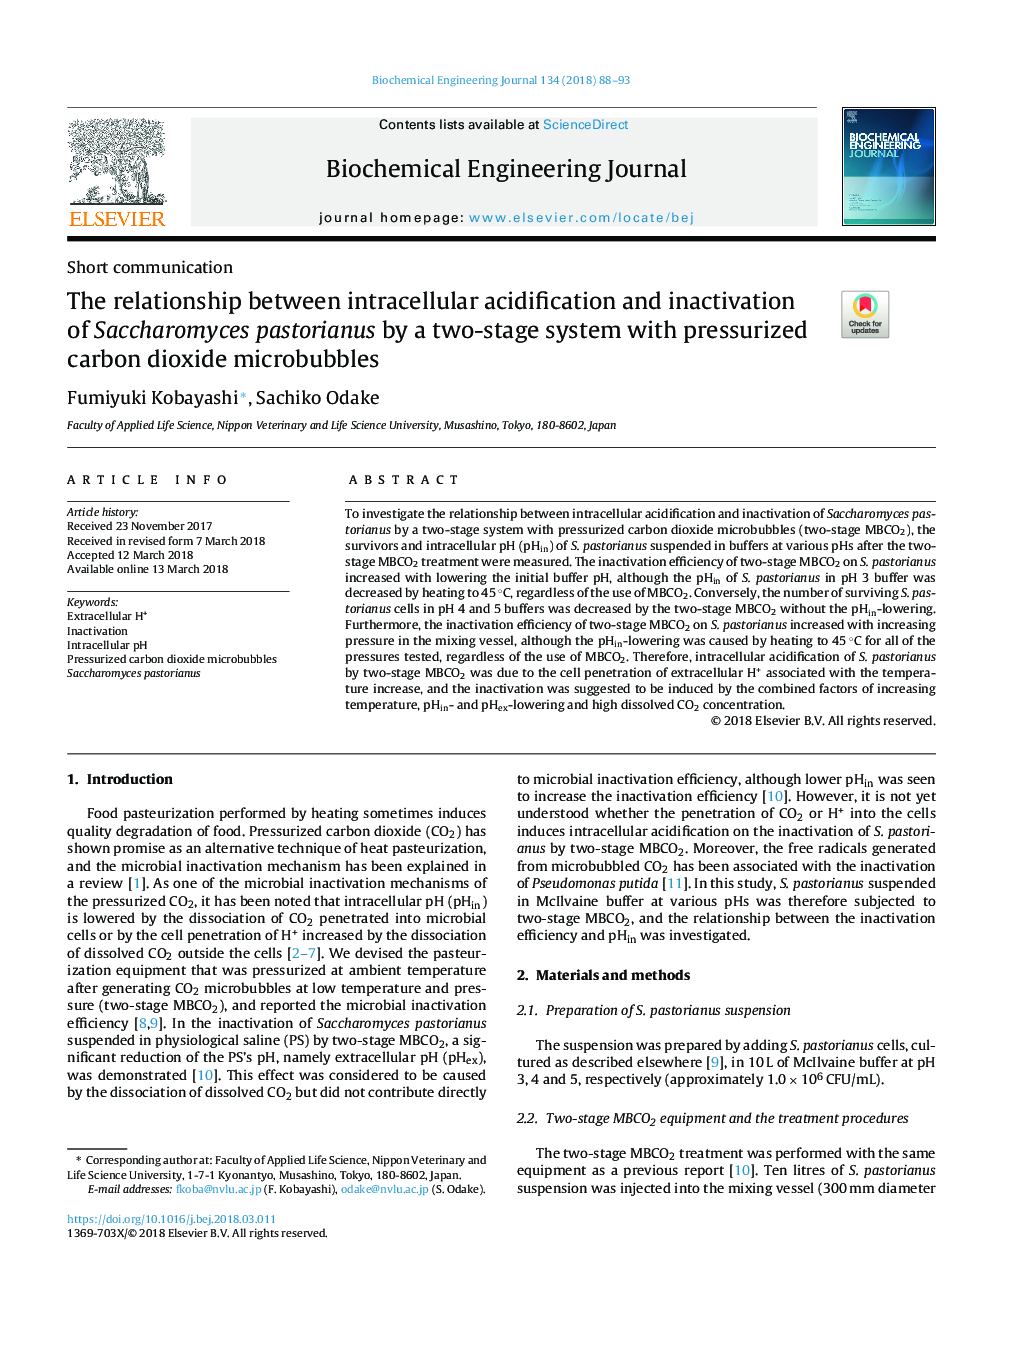 The relationship between intracellular acidification and inactivation of Saccharomyces pastorianus by a two-stage system with pressurized carbon dioxide microbubbles